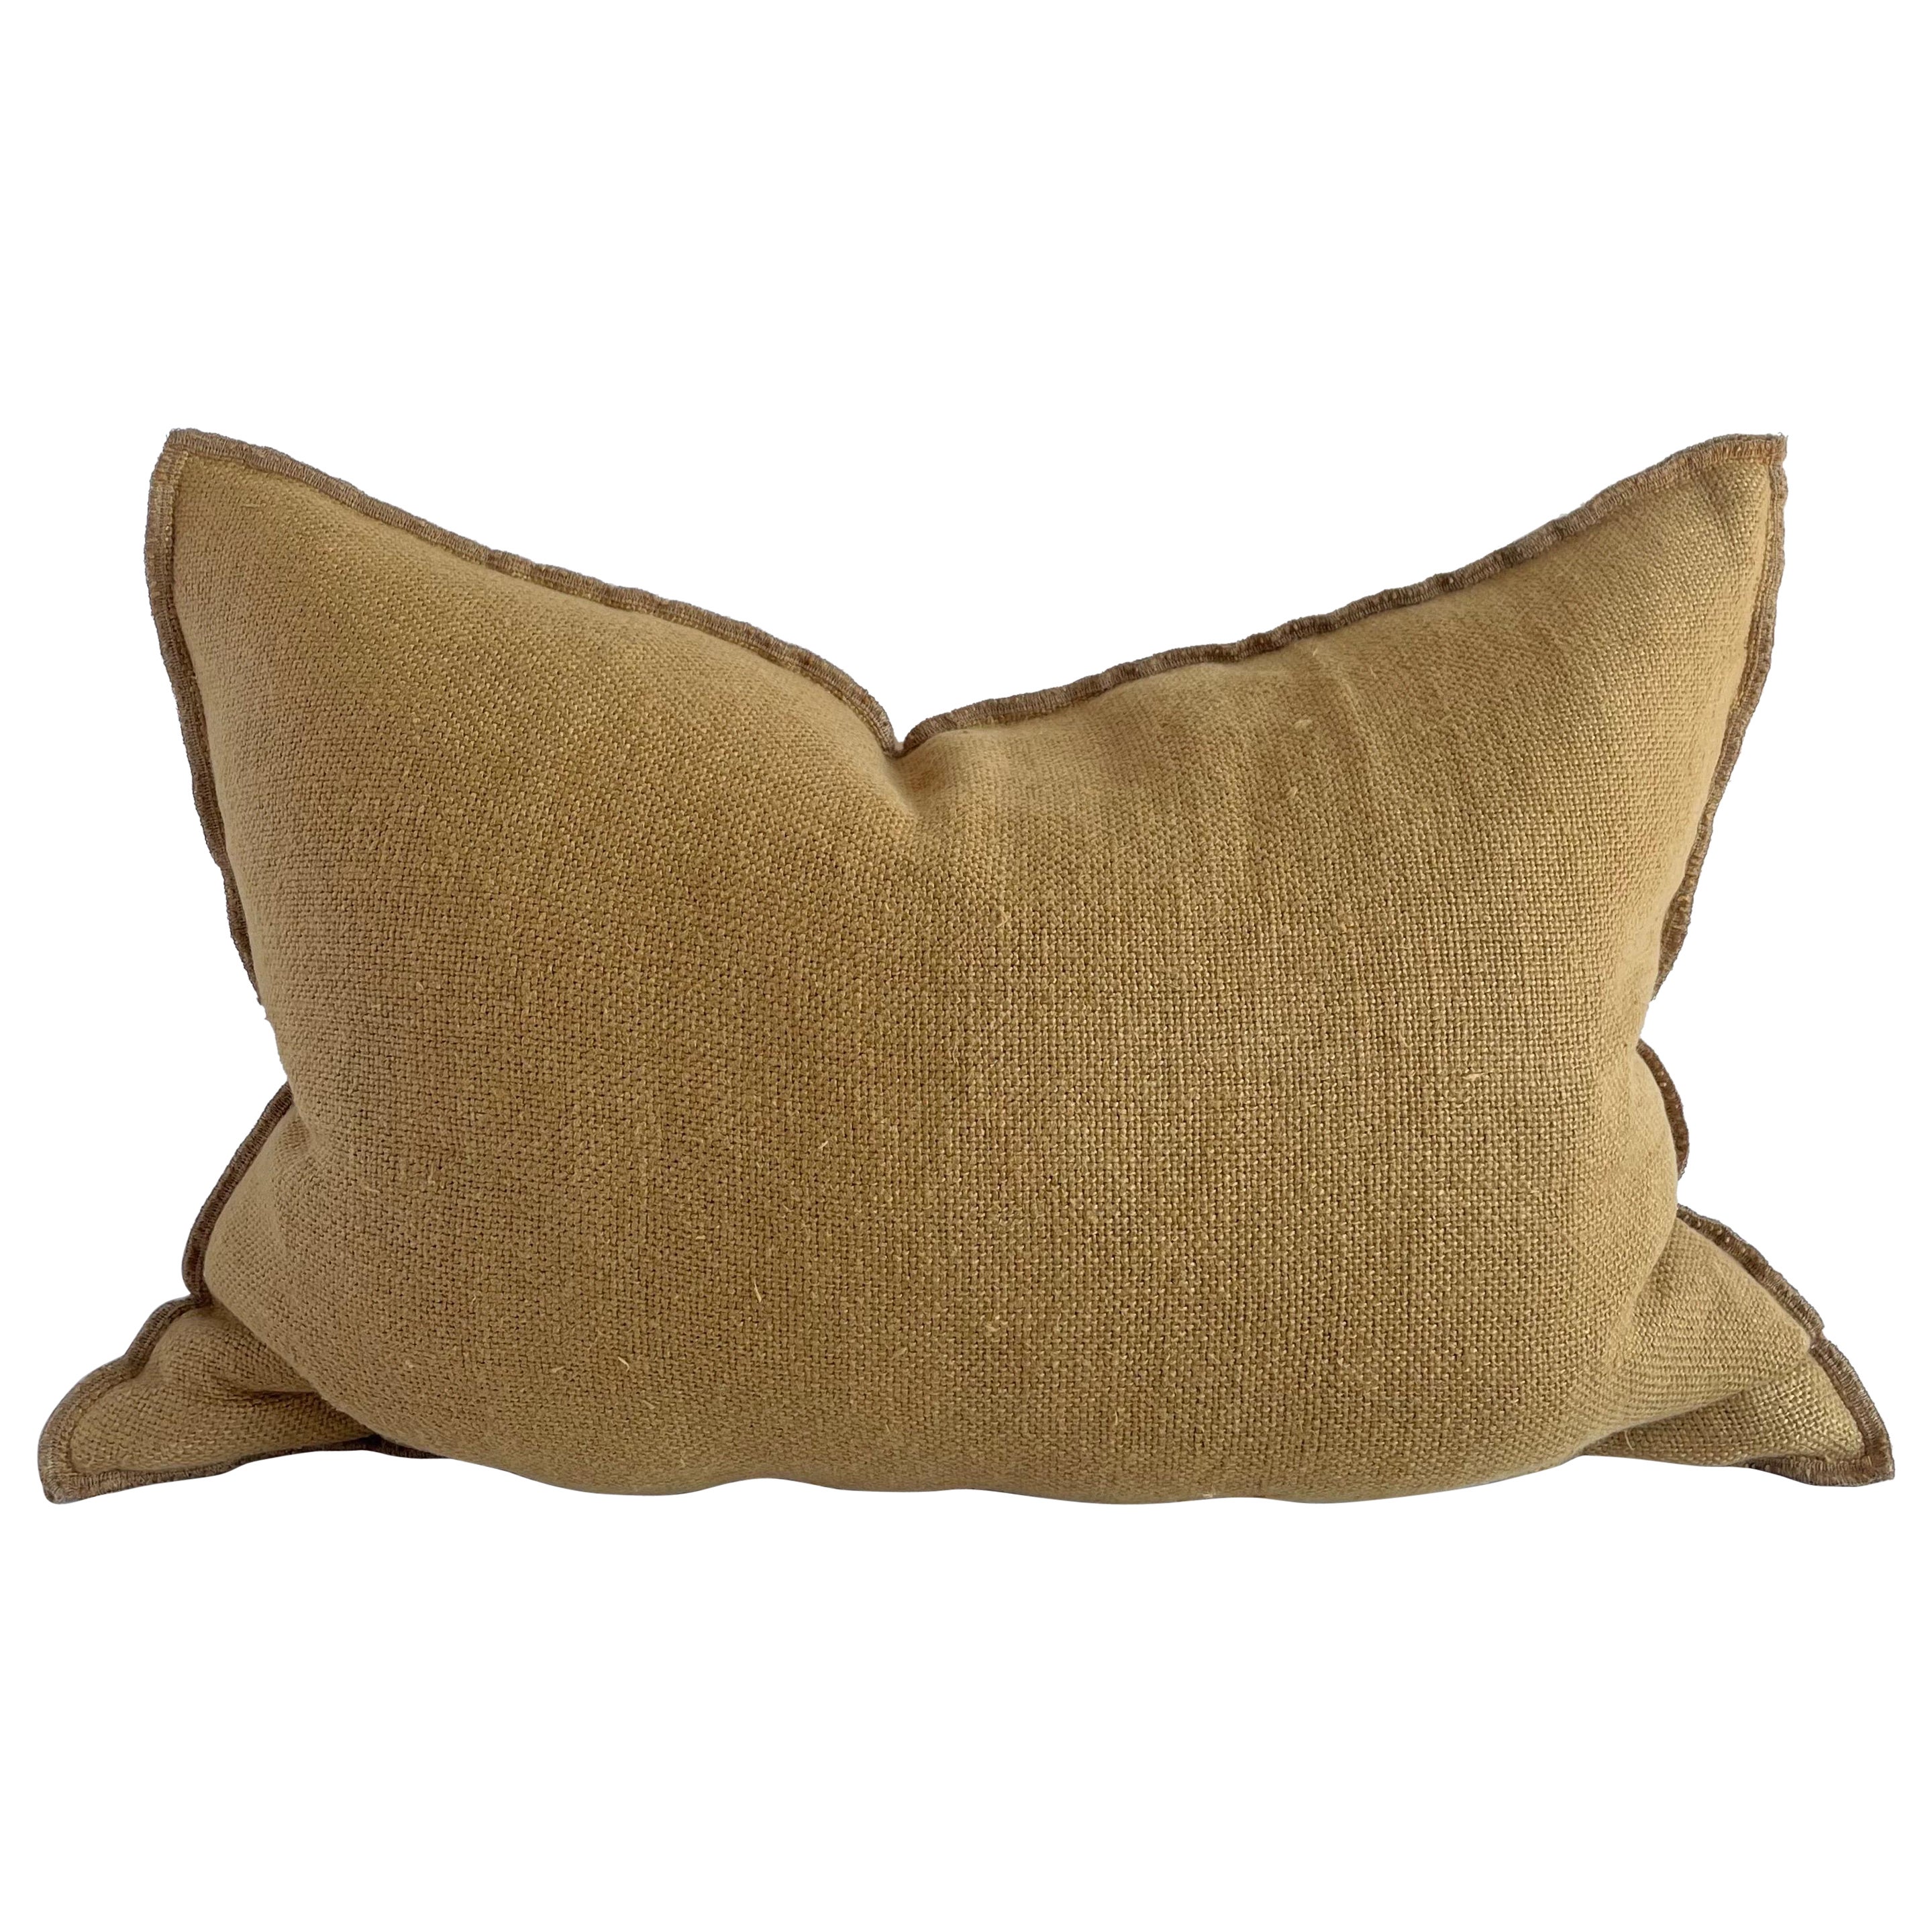 French Nubby Linen Accent Pillow in Golden Brown